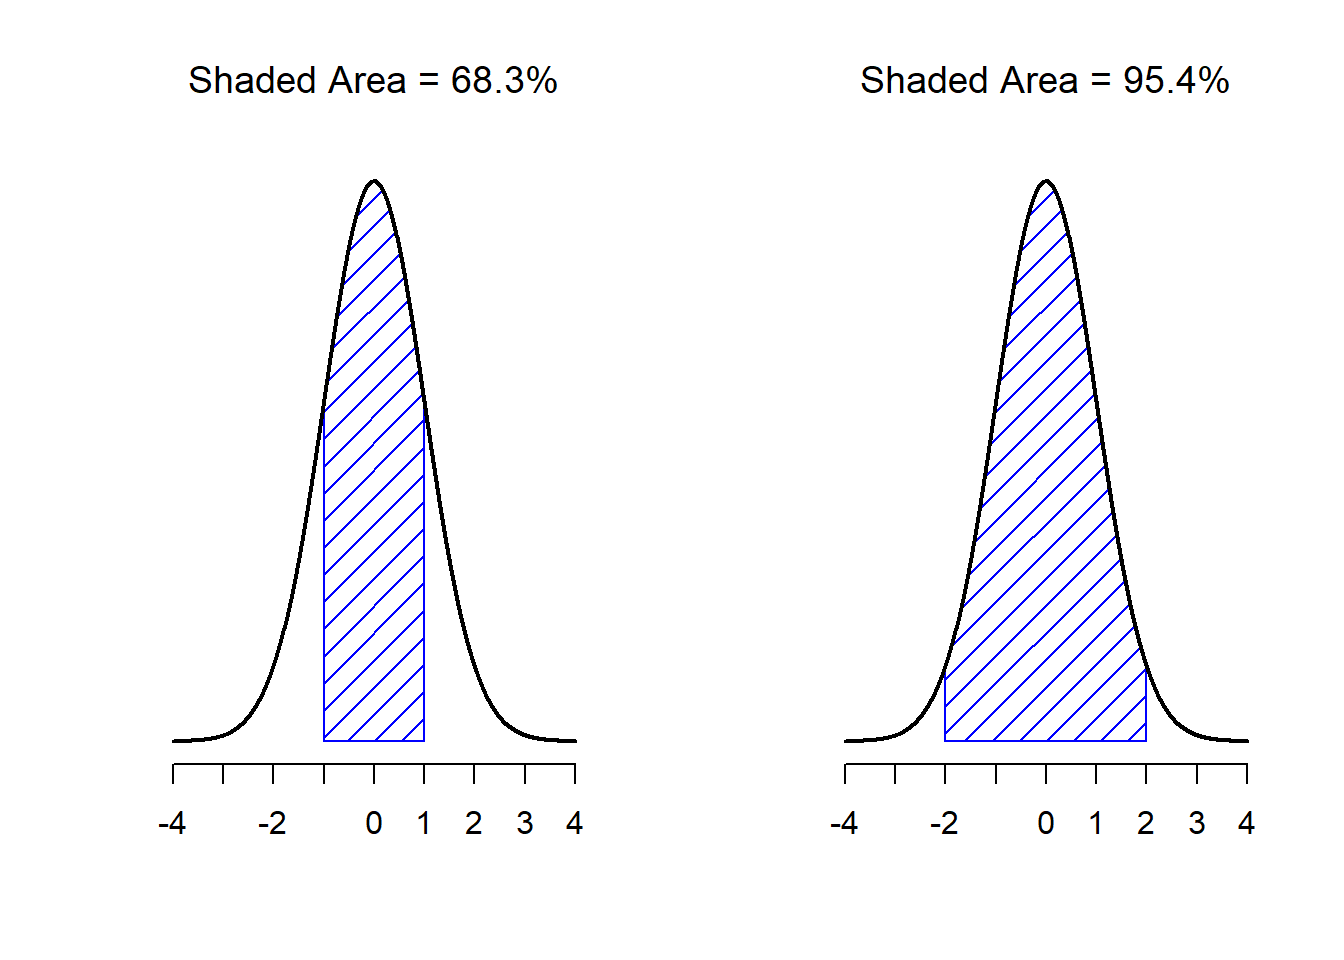 The area under the curve tells you the probability that an observation falls within a particular range. The solid lines plot normal distributions with mean $mu=0$ and standard deviation $sigma=1$ The shaded areas illustrate "areas under the curve" for two important cases. On the left, we can see that there is a 68.3% chance that an observation will fall within one standard deviation of the mean. On the right, we see that there is a 95.4% chance that an observation will fall within two standard deviations of the mean